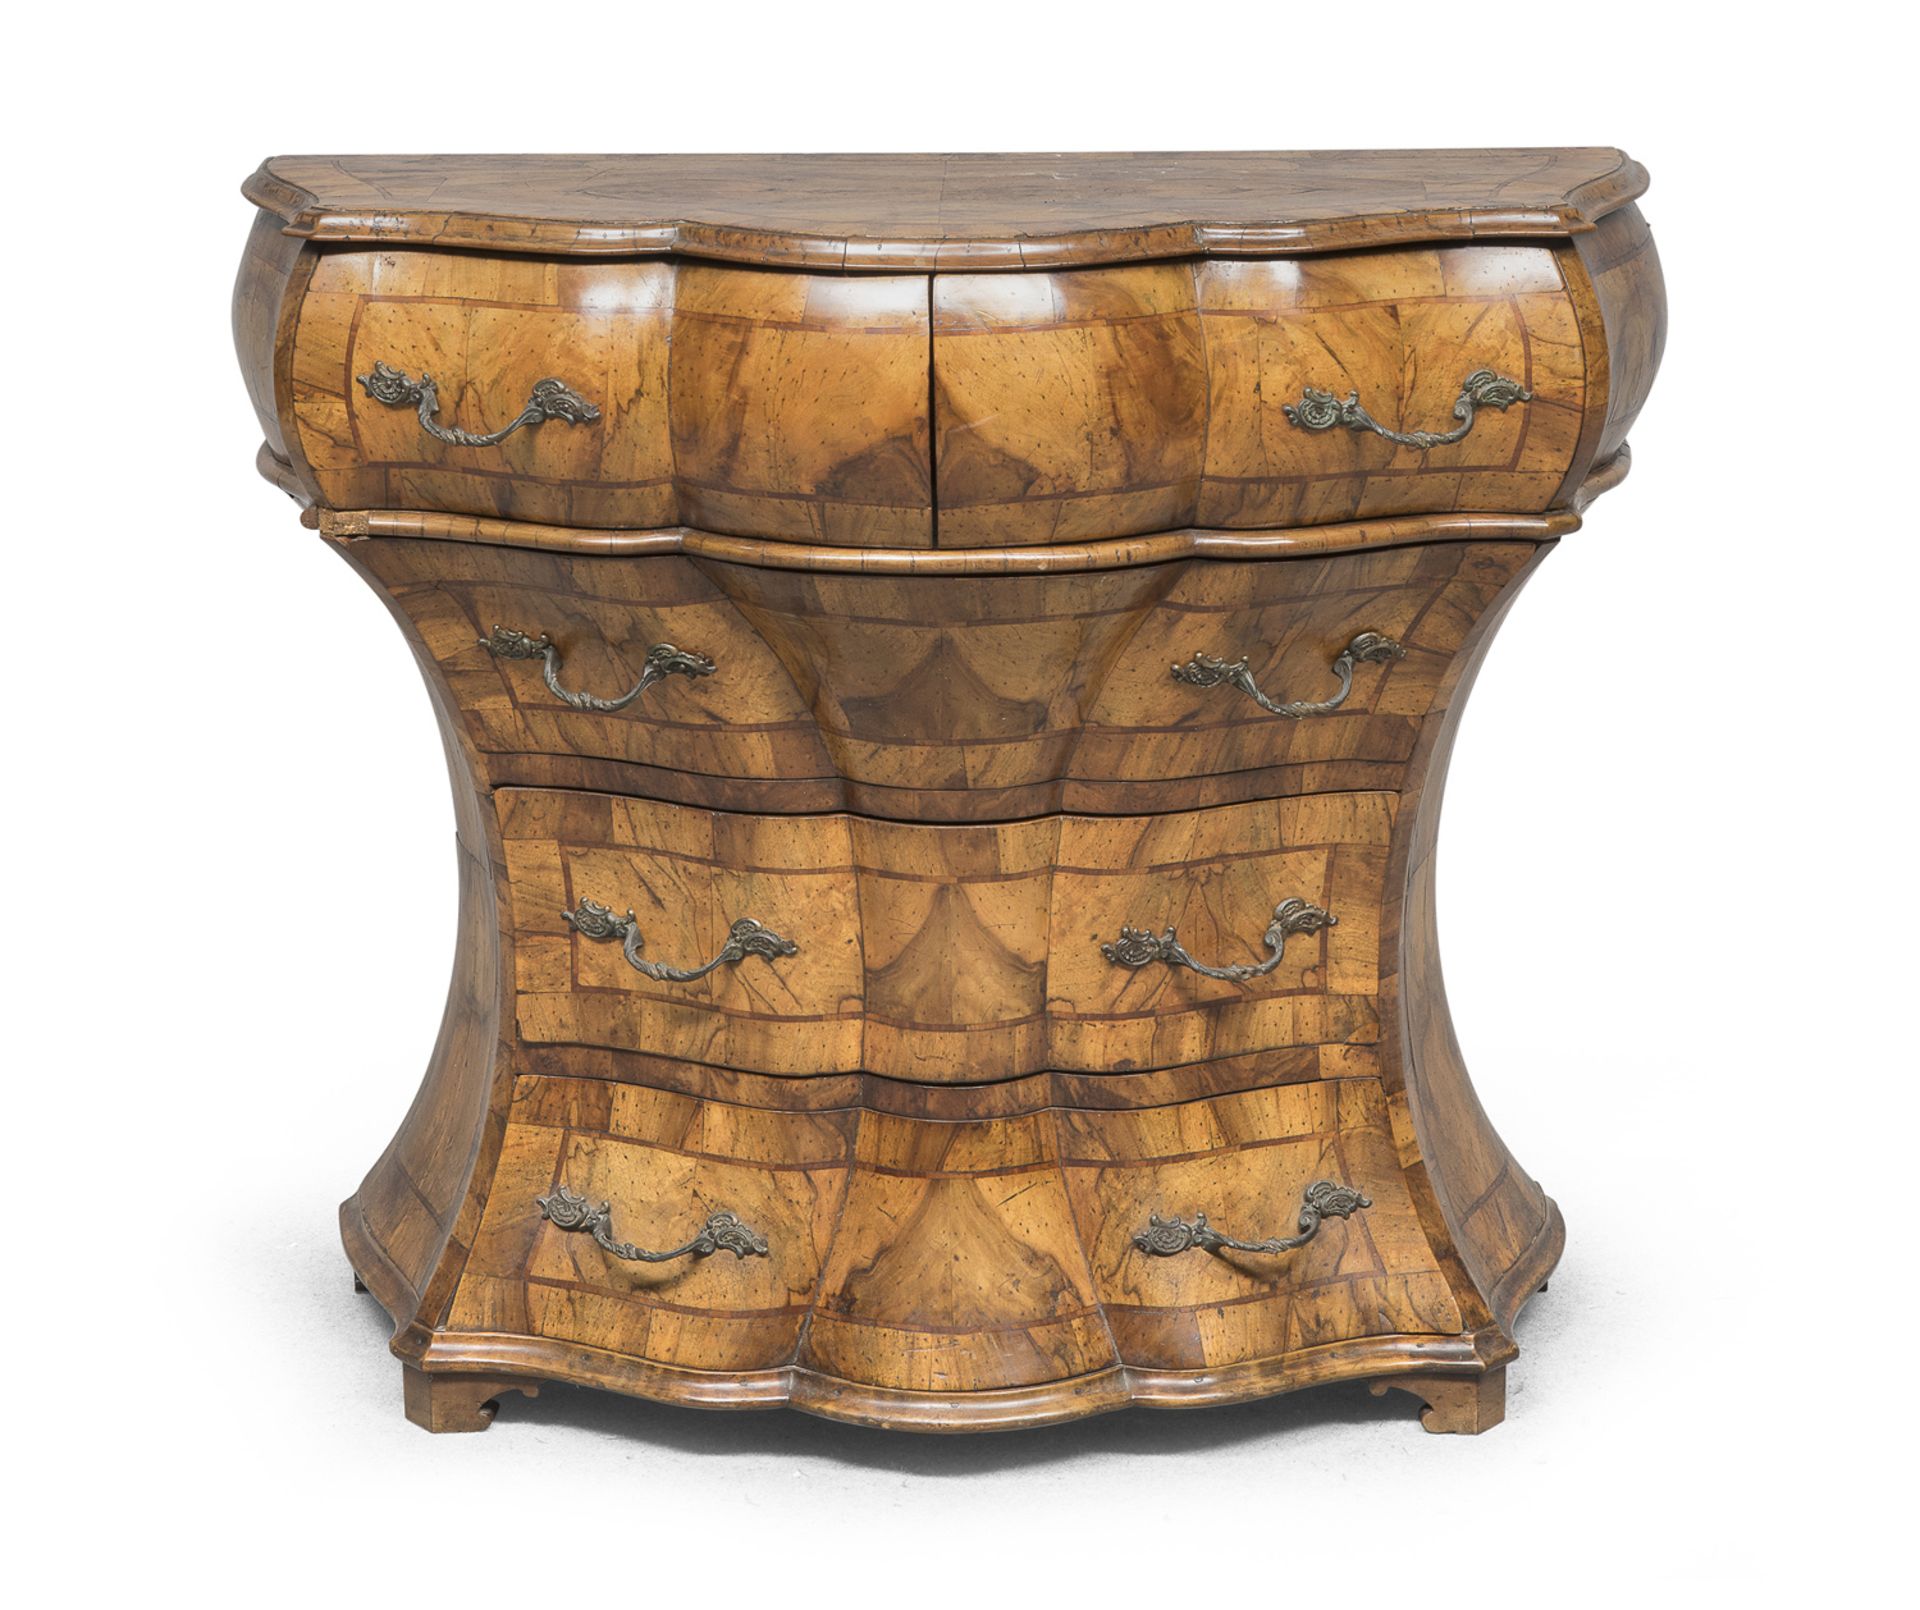 OLIVE ROOT COMMODE IN VENETIAN STYLE LATE 19TH CENTURY